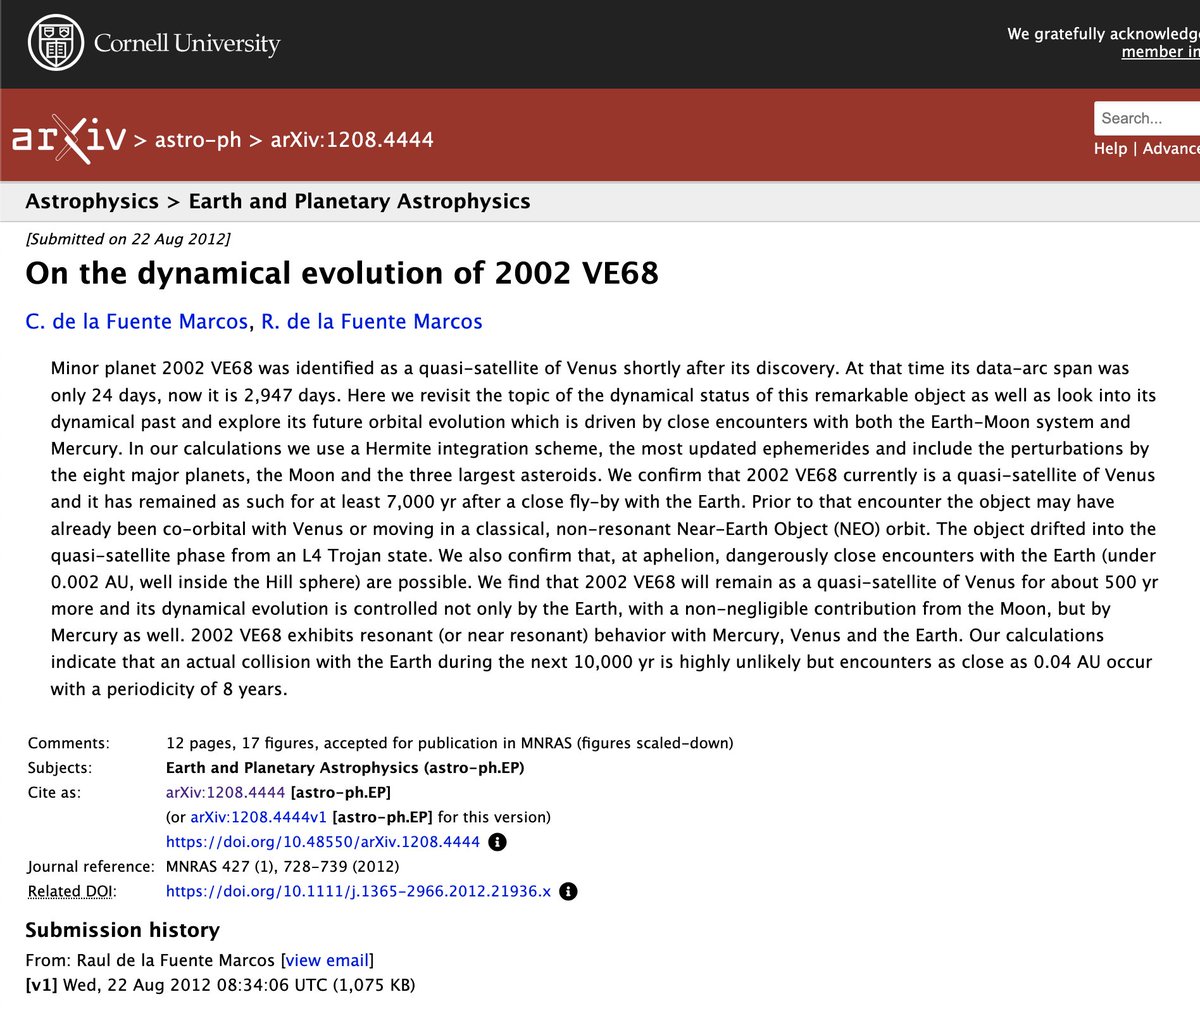 Paper titled "On the Dynamical Evolution of 2002 VE 68" by C. and R. de la Fuente Marcos